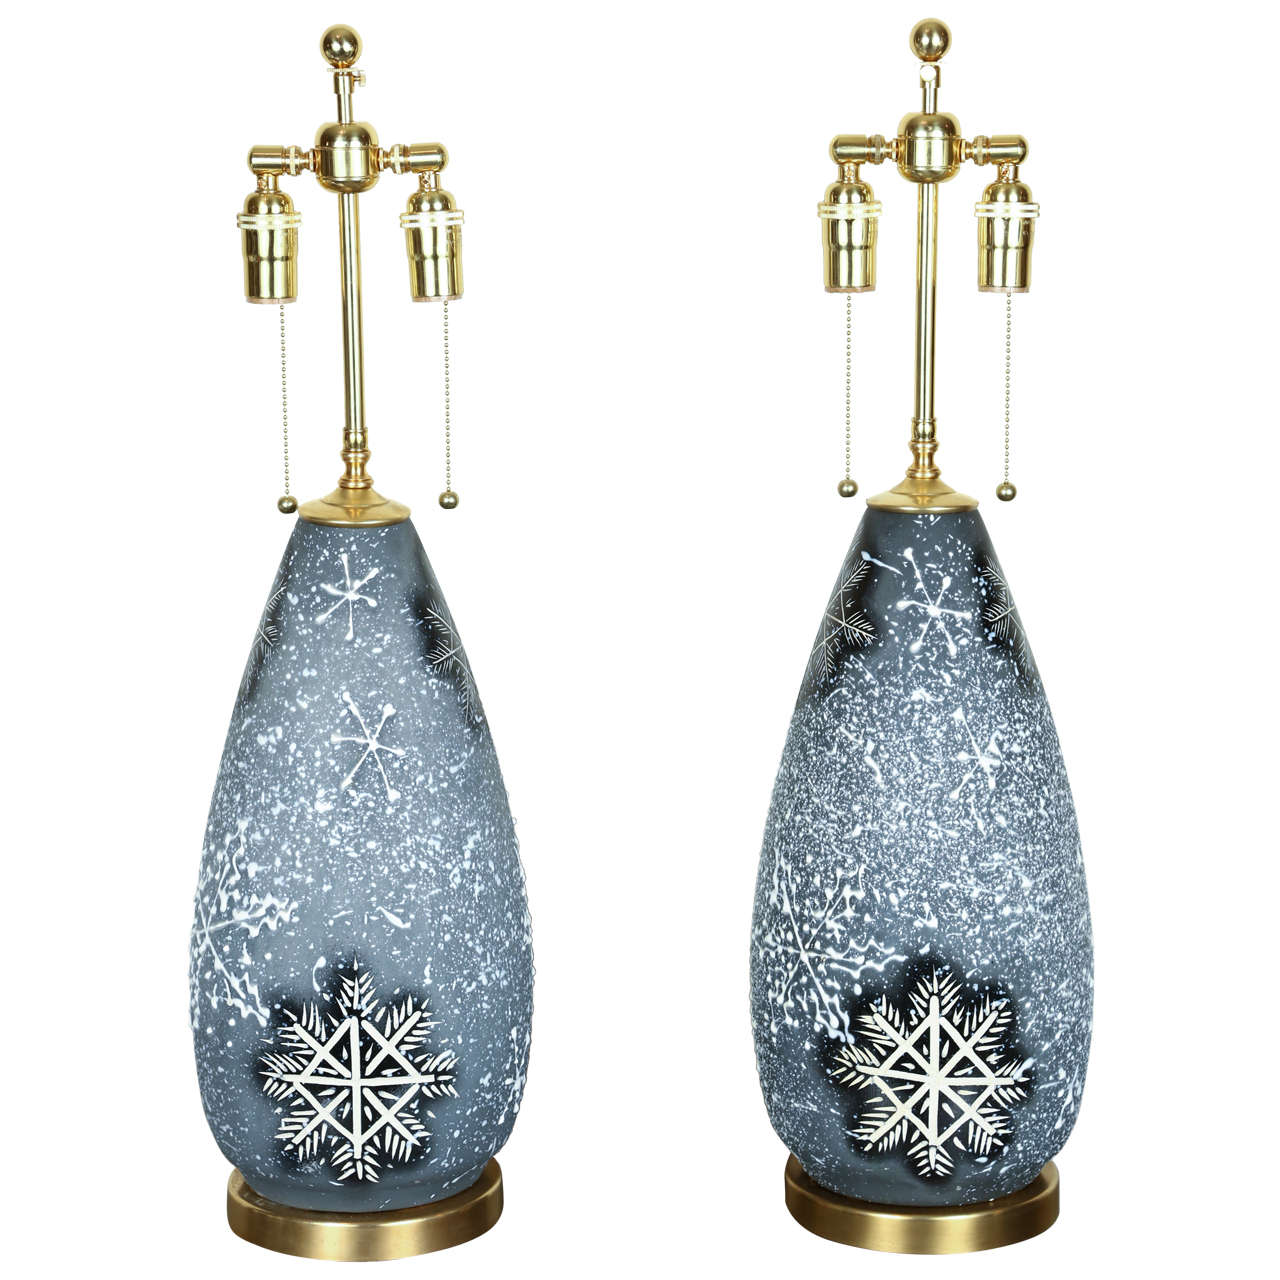 Pair of Lovely Ceramic Lamps with a Whimsical Snowflake Design For Sale